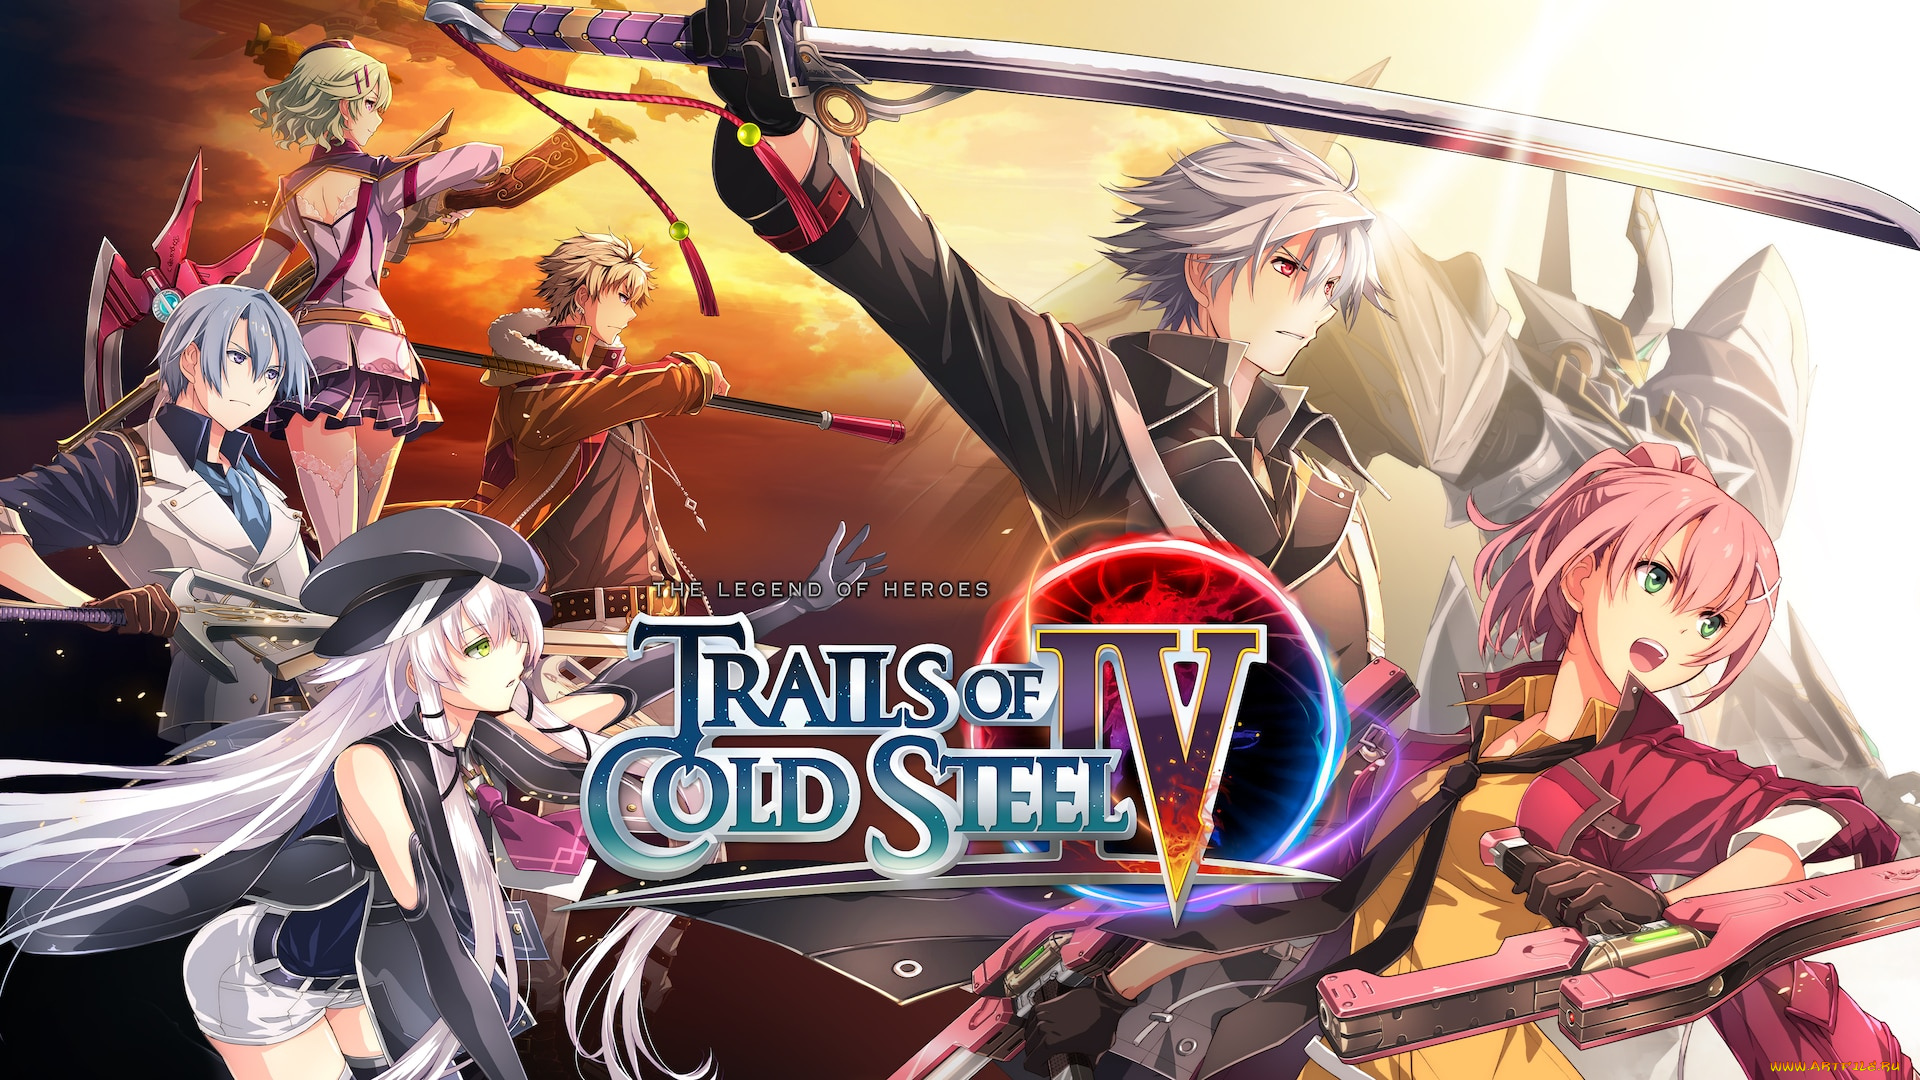 the, legend, of, heroes, trails, of, cold, steel, iv, t, видео, игры, the, legend, of, heroes, iv, the, legend, of, heroes, trails, cold, steel, iv, t